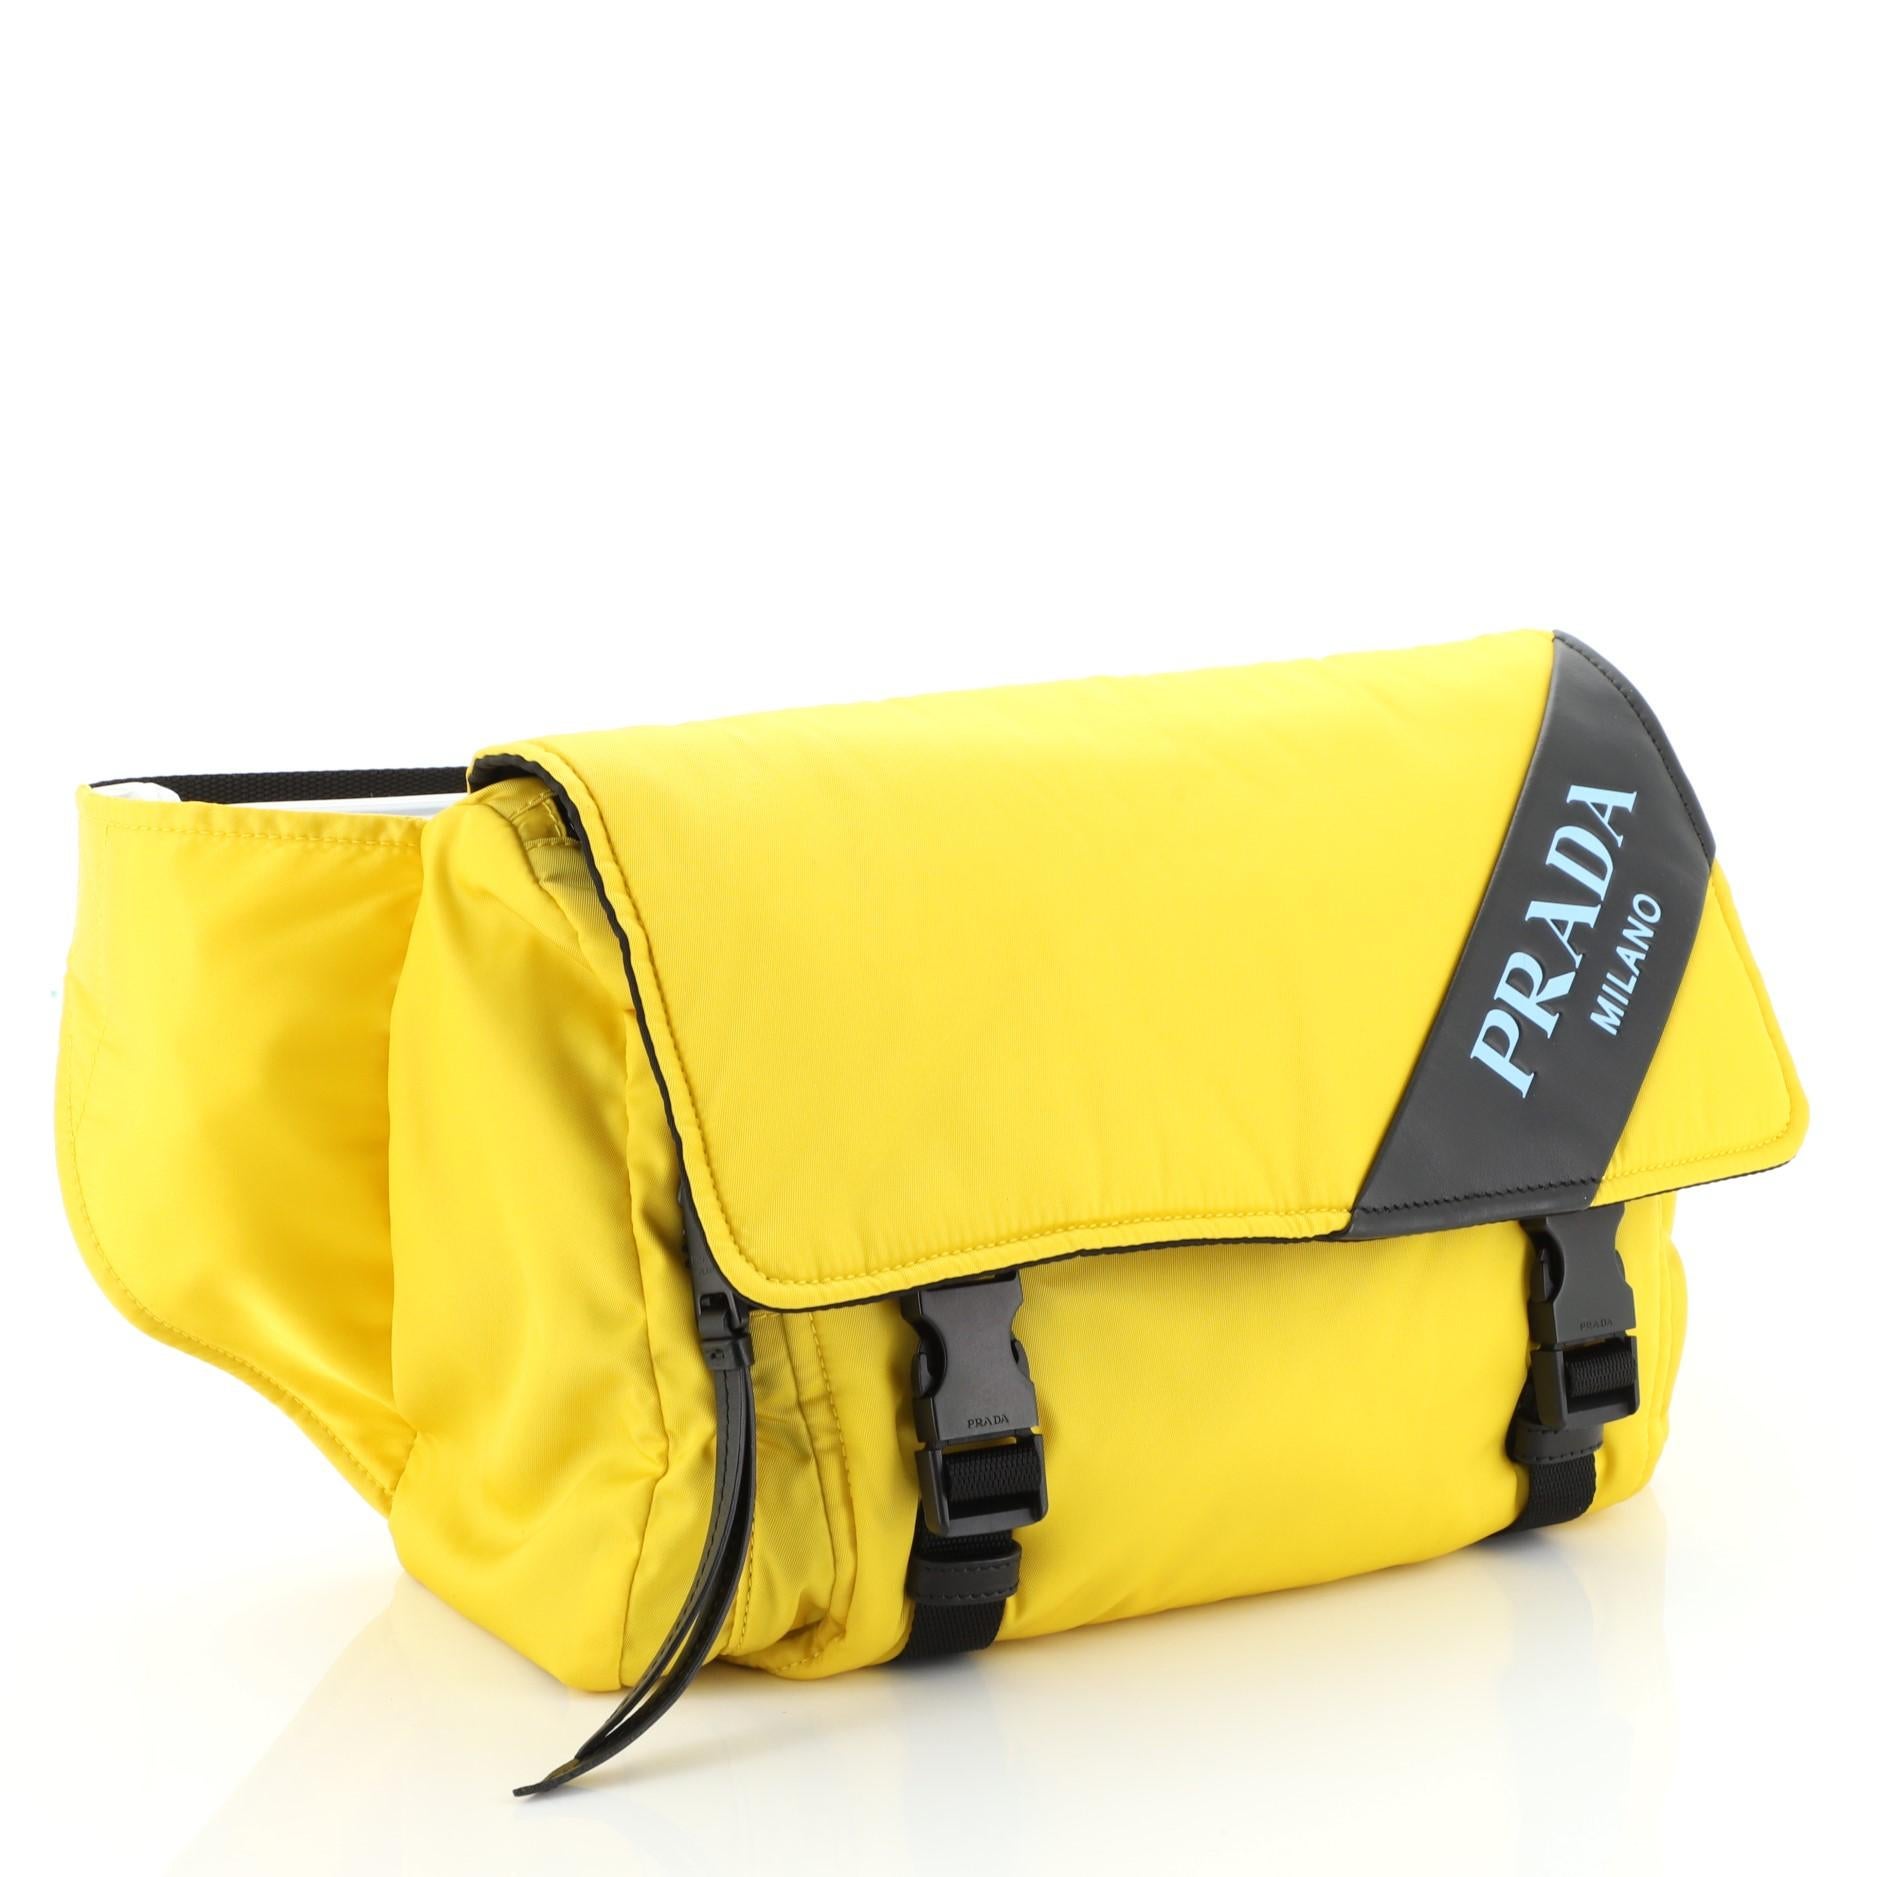 This Prada Logo Stripe Messenger Bag Tessuto Medium, crafted from yellow tessuto, features adjustable strap, debossed logo on leather plaque, and black-tone hardware. Its buckle closure opens to a black nylon interior with zip pocket. 

Estimated